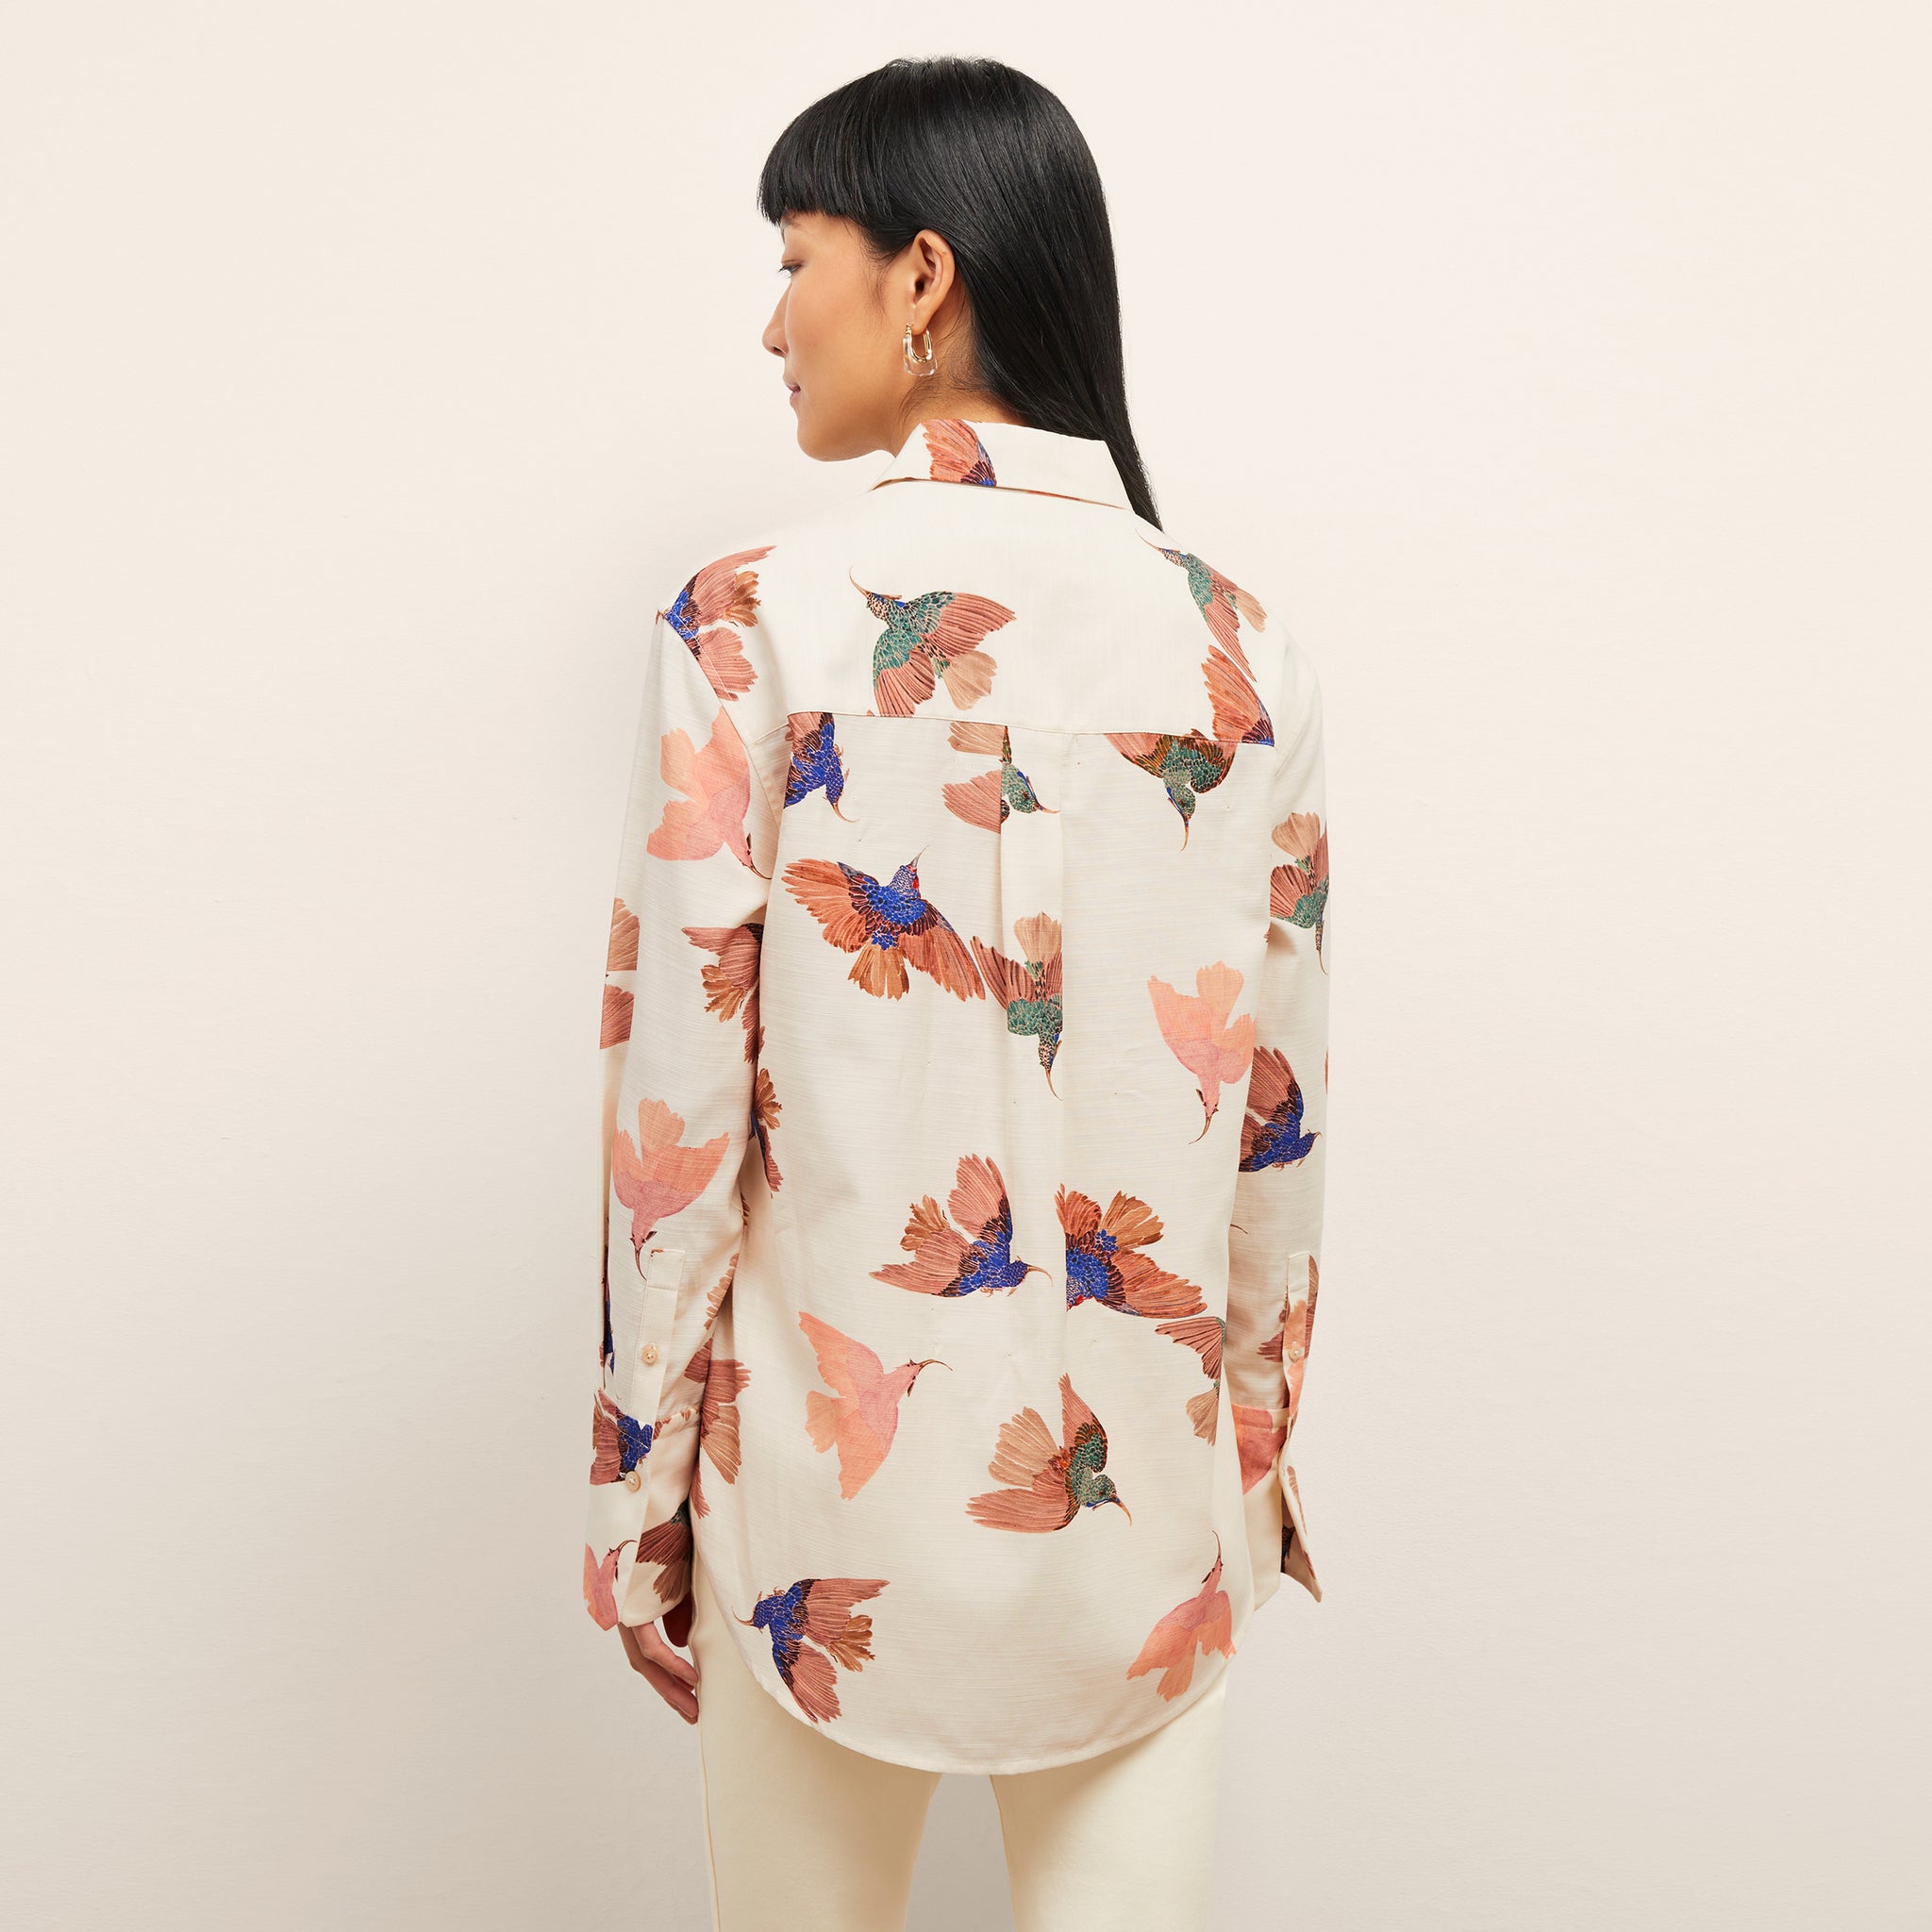 back image of a woman wearing the mila top in hummingbird print